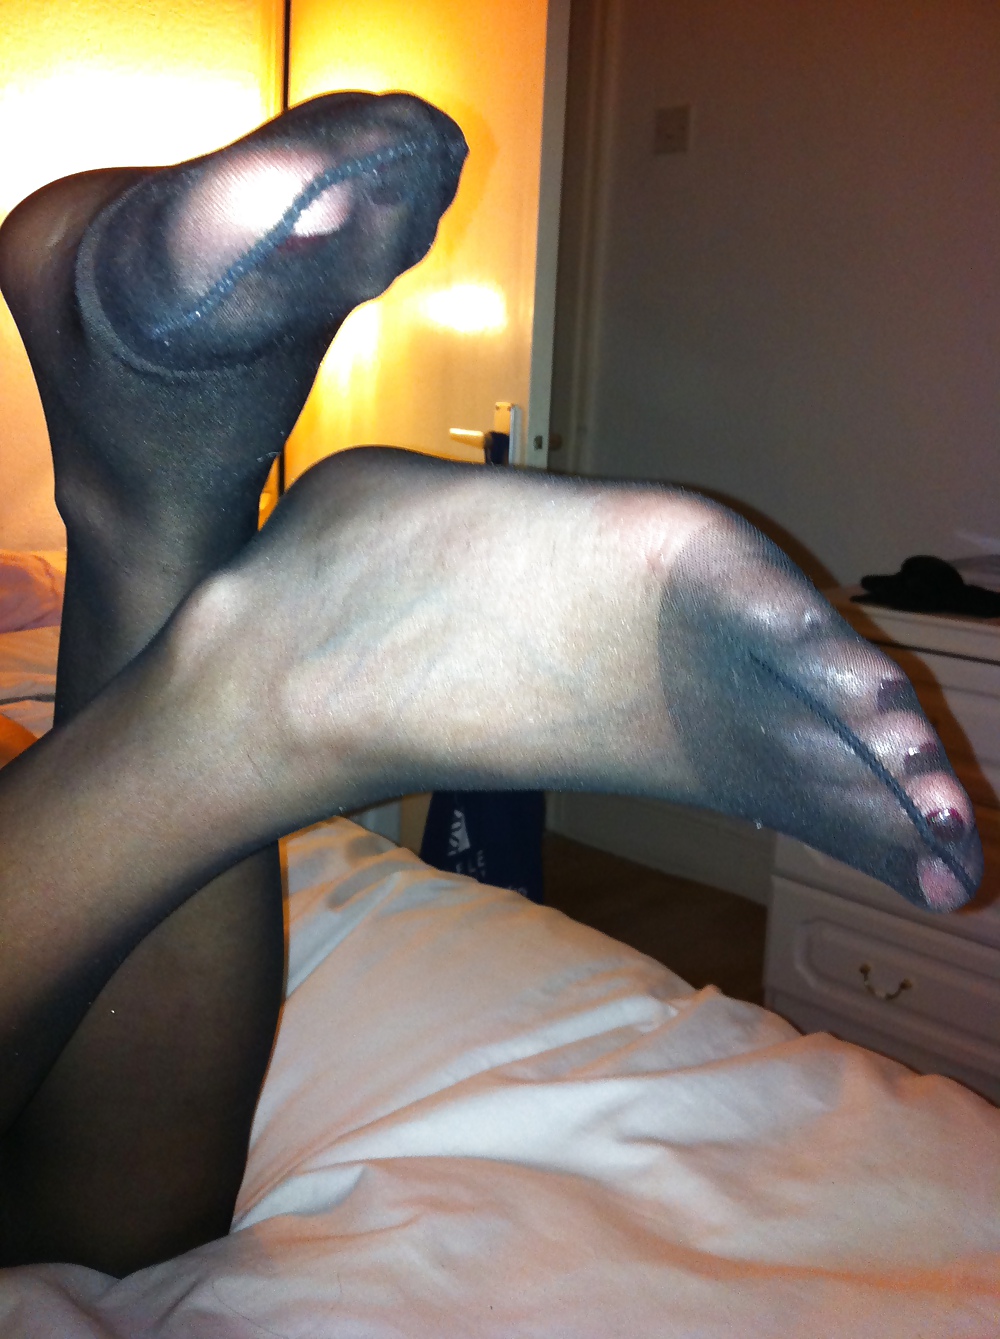 her sexy stocking feet i coverd in my cum porn gallery